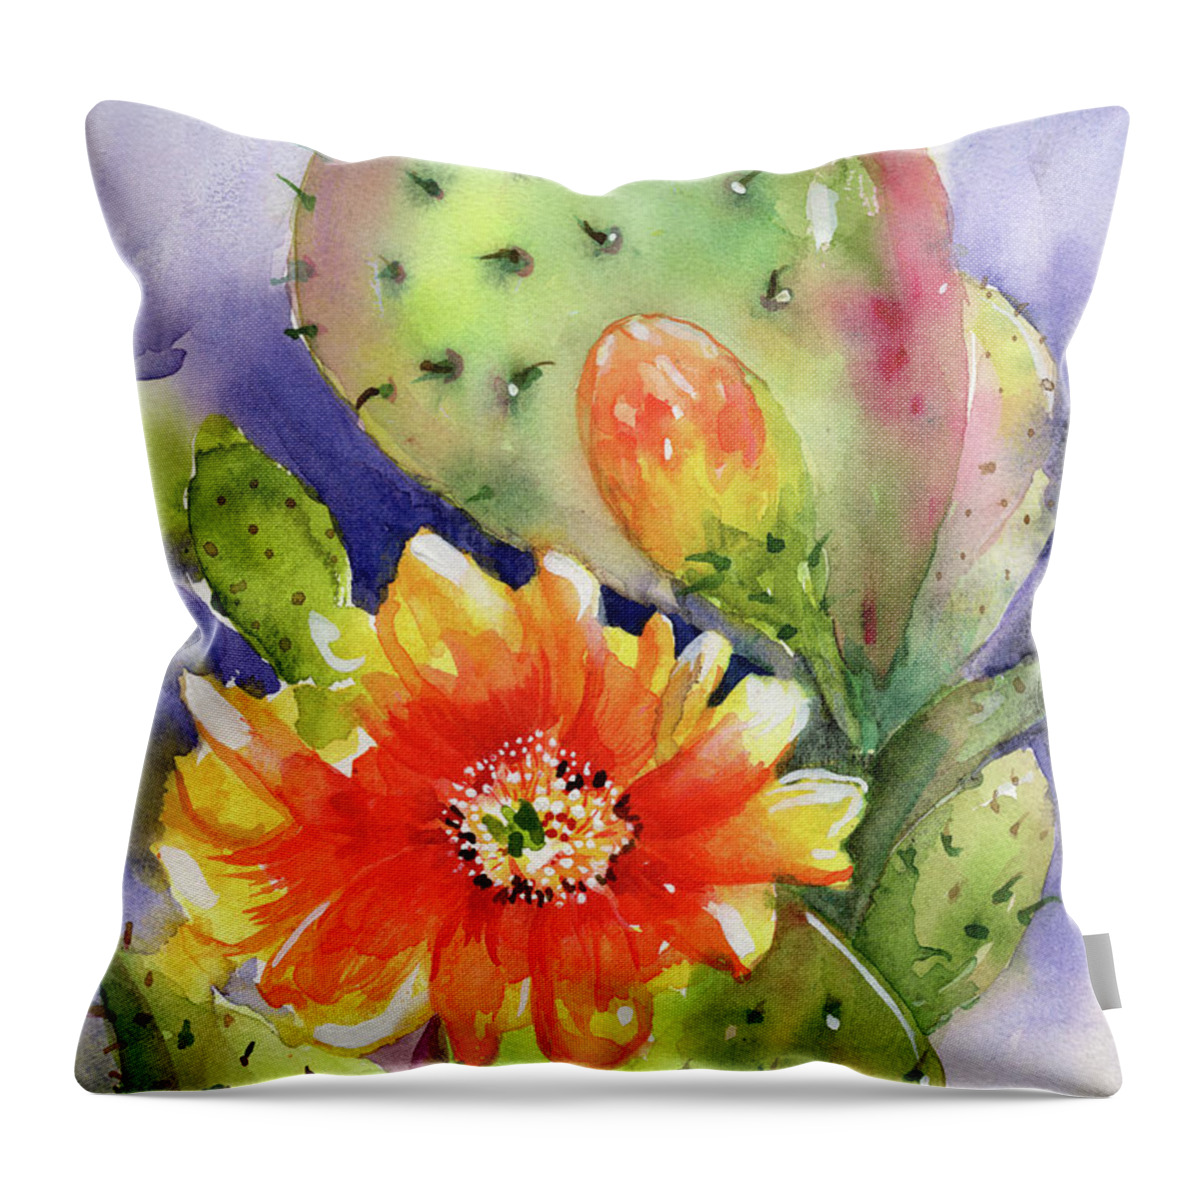 Cactus Throw Pillow featuring the painting Prickly Pear Bloom by Mary Lou McCambridge